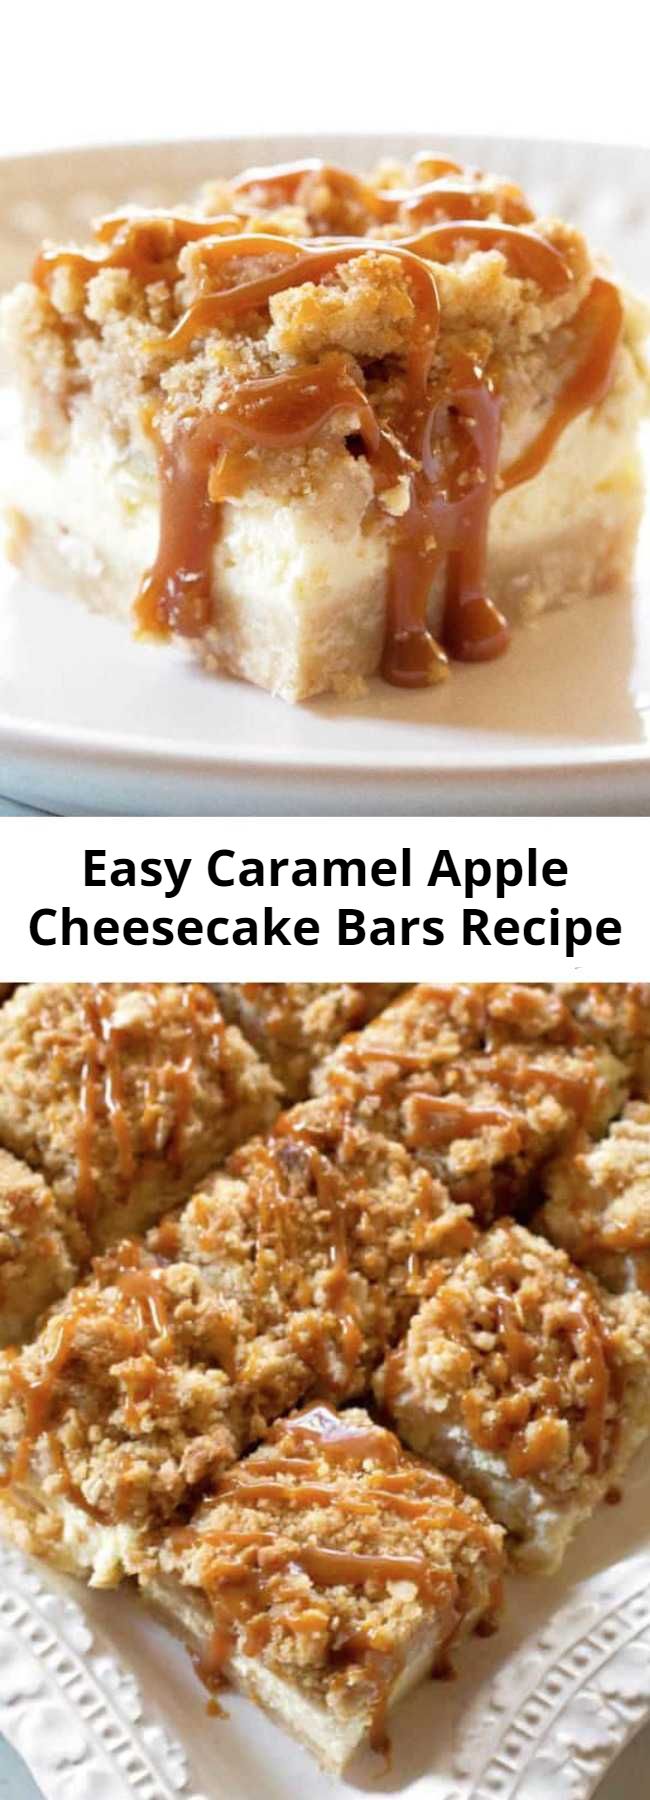 Easy Caramel Apple Cheesecake Bars Recipe - These creamy Caramel Apple Cheesecake Bars start with a shortbread crust, a thick cheesecake layer, and are topped with diced cinnamon apples and a sweet streusel topping. These are a tried and true cheesecake bar dessert recipe.